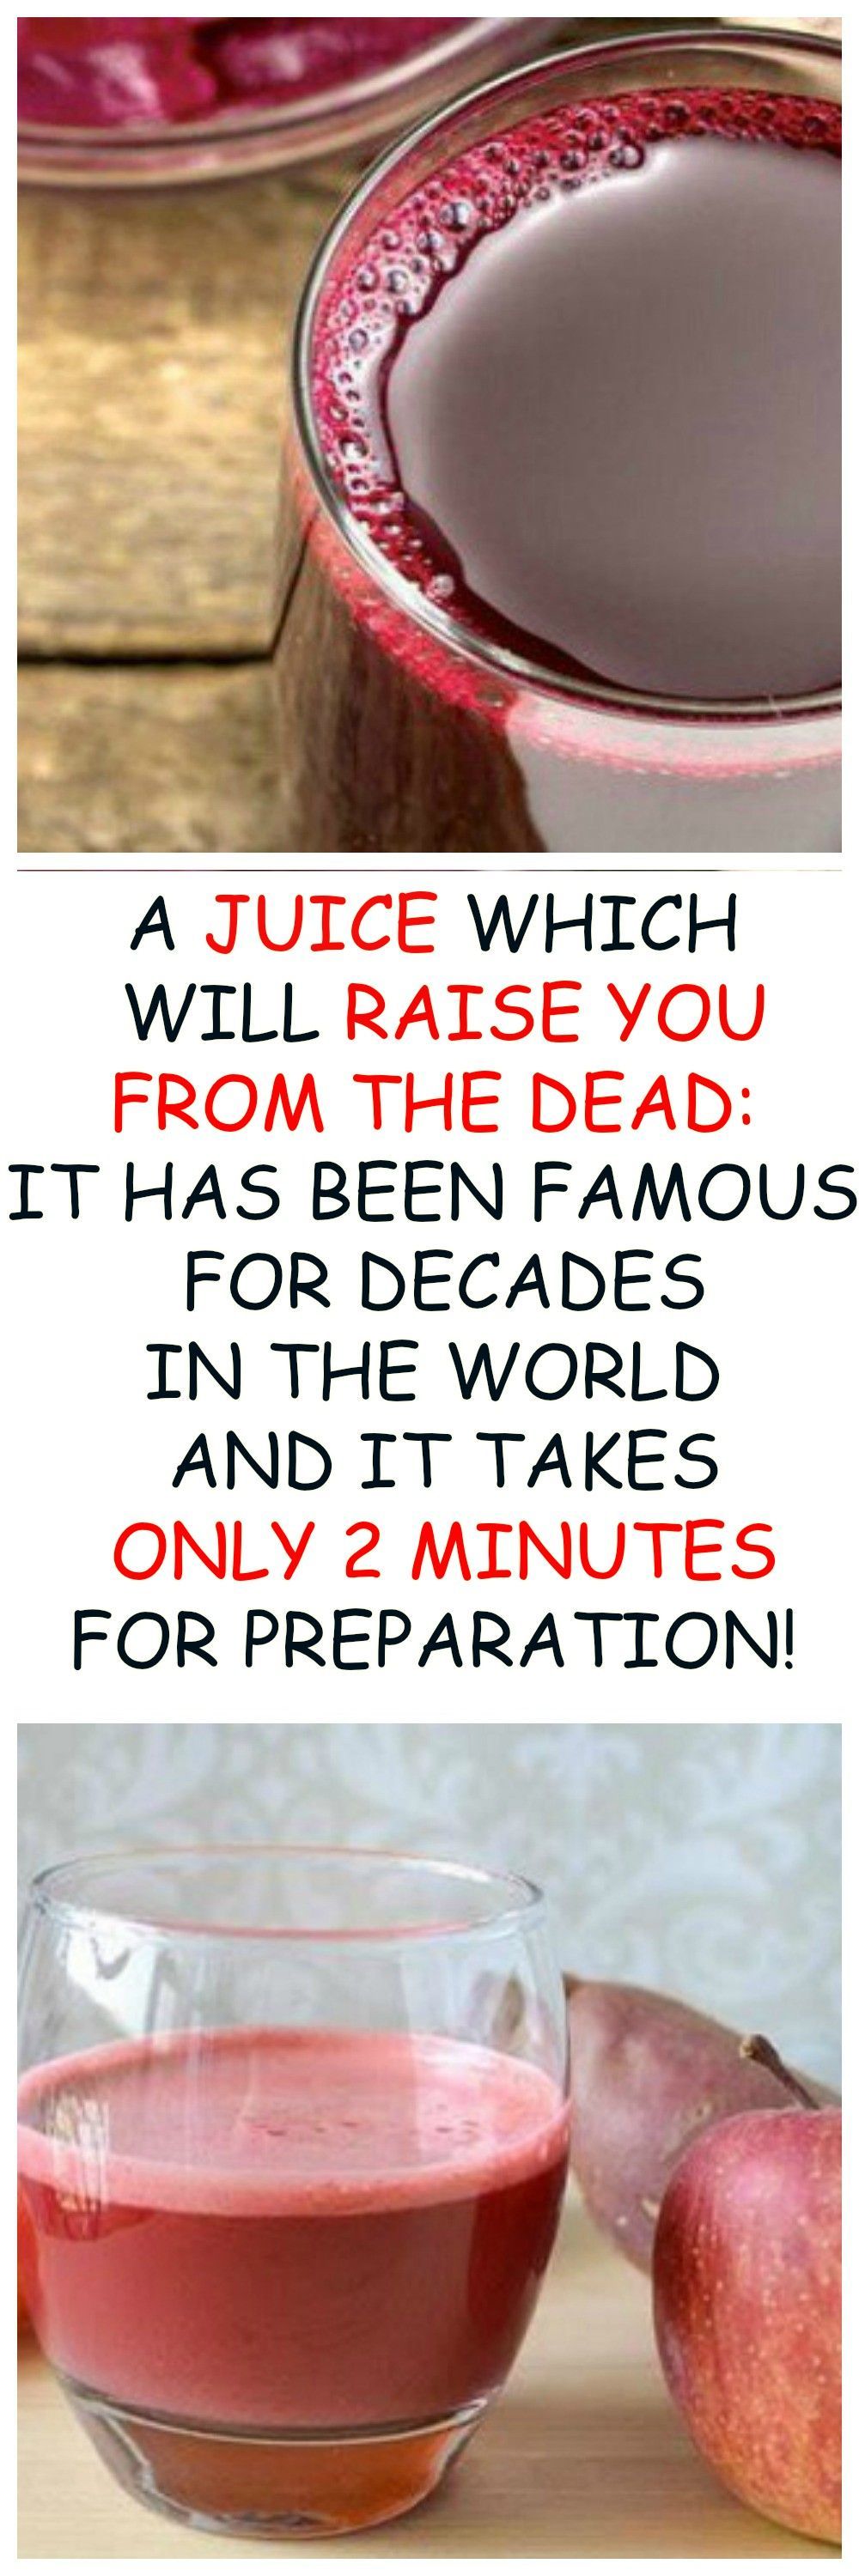 A JUICE WHICH WILL RAISE YOU FROM THE DEAD: IT HAS BEEN FAMOUS FOR DECADES IN THE WORLD AND IT TAKES ONLY 2 MINUTES FOR